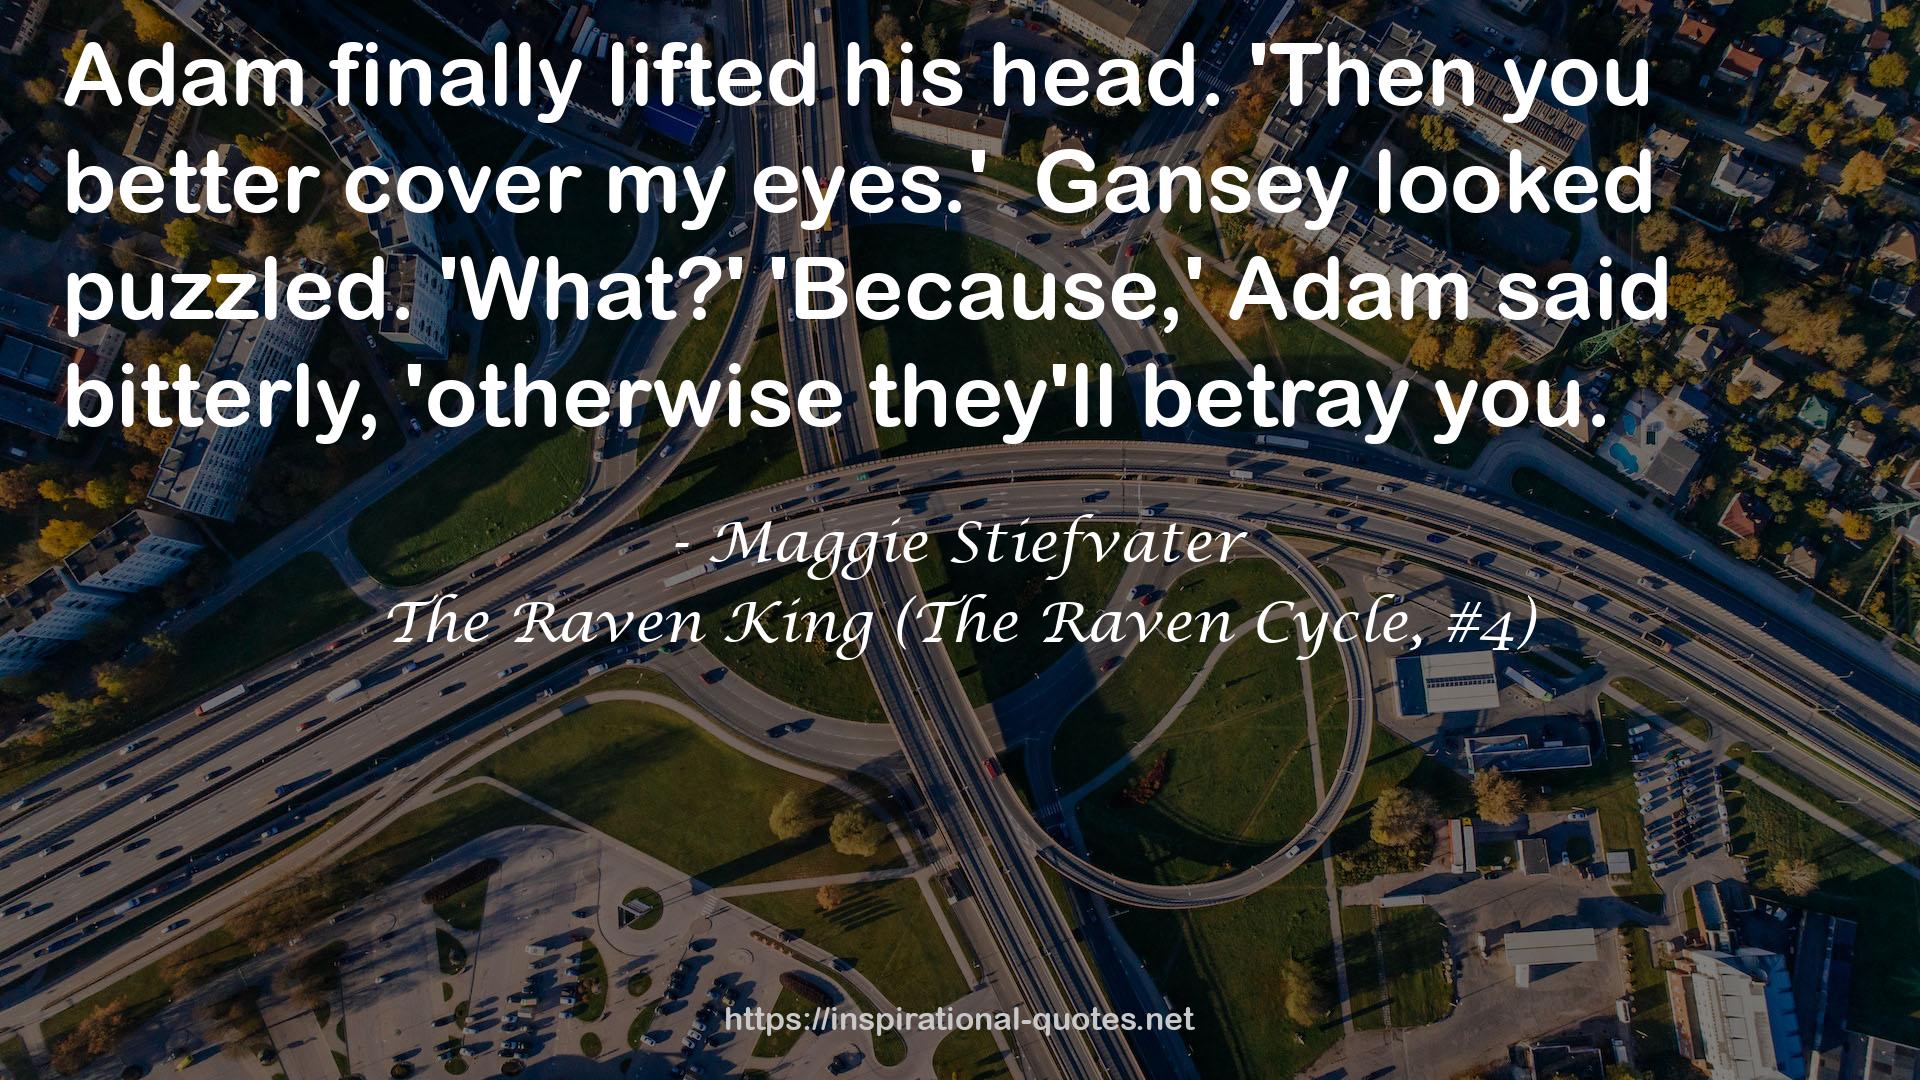 The Raven King (The Raven Cycle, #4) QUOTES